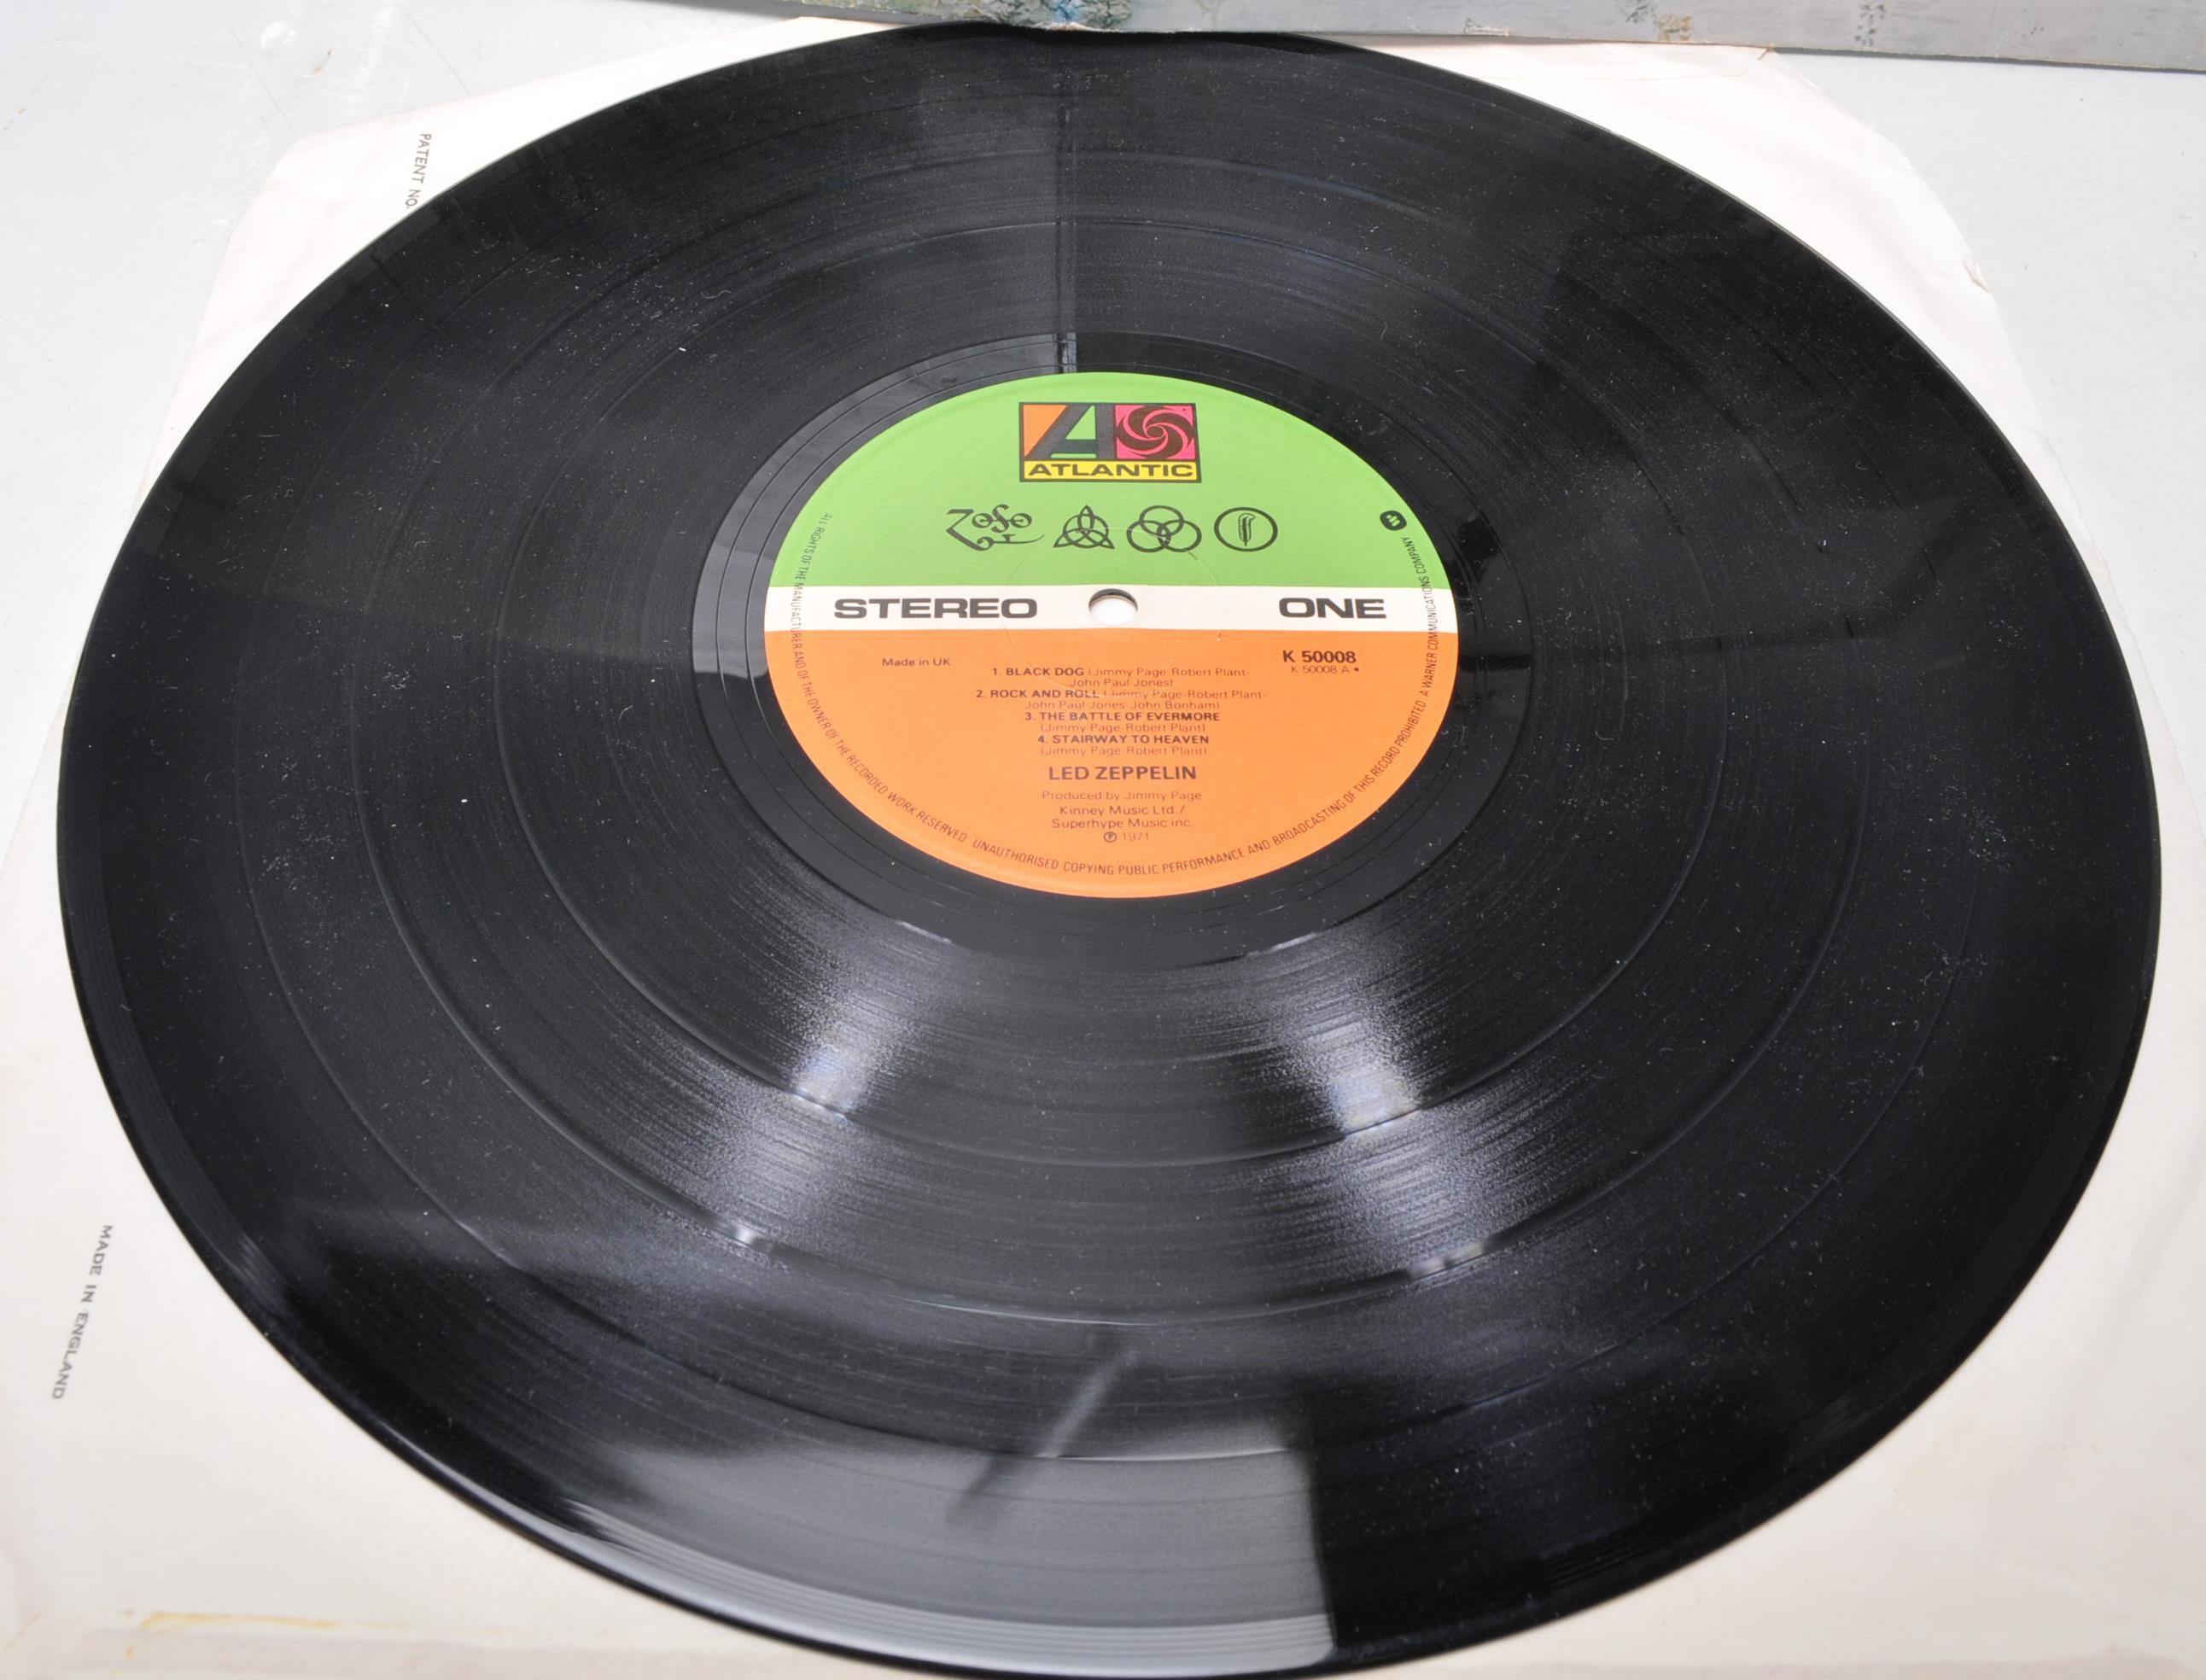 A vinyl long play LP record album by Led Zeppelin - Image 2 of 4